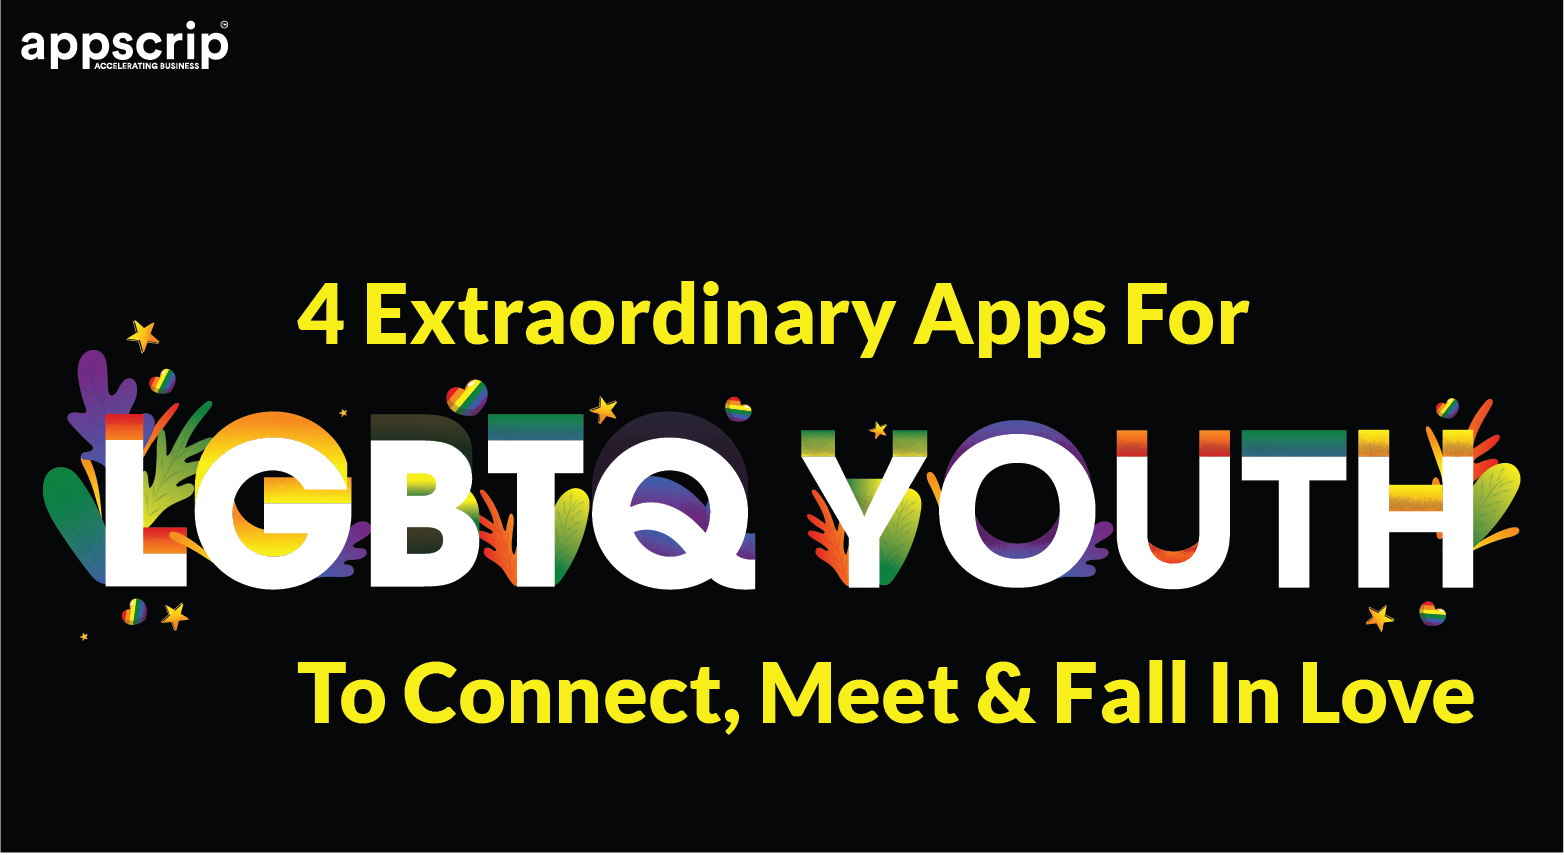 apps for lgbtq youth